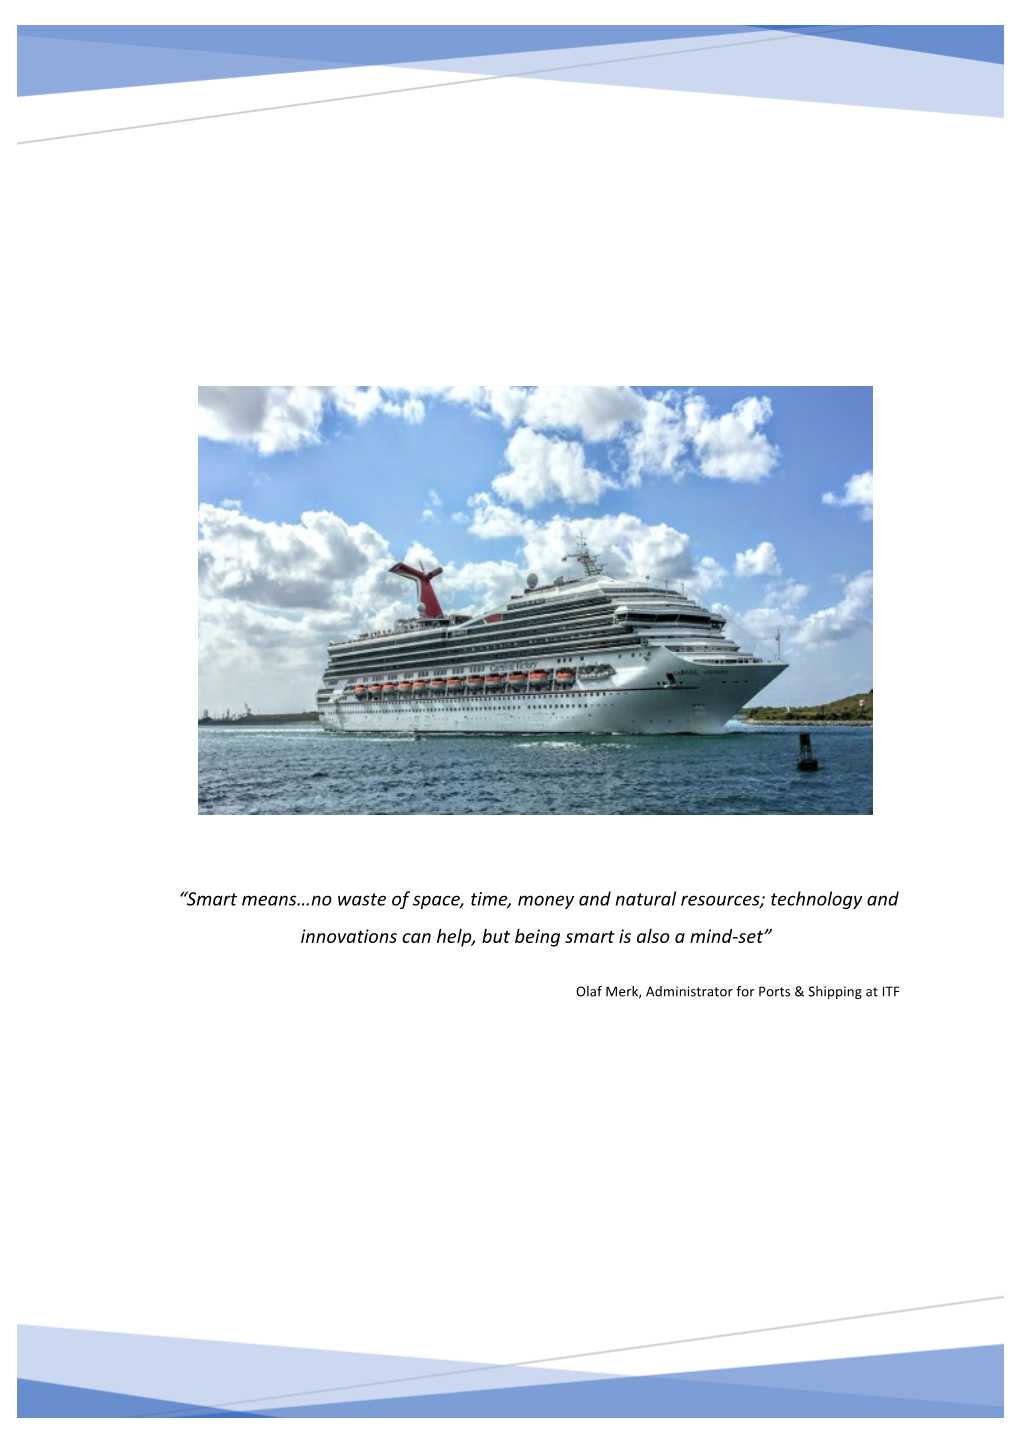 Smart Cruise Ships; in What Way Information and Communication Technologies Are Revolutionizing the Cruise Experience